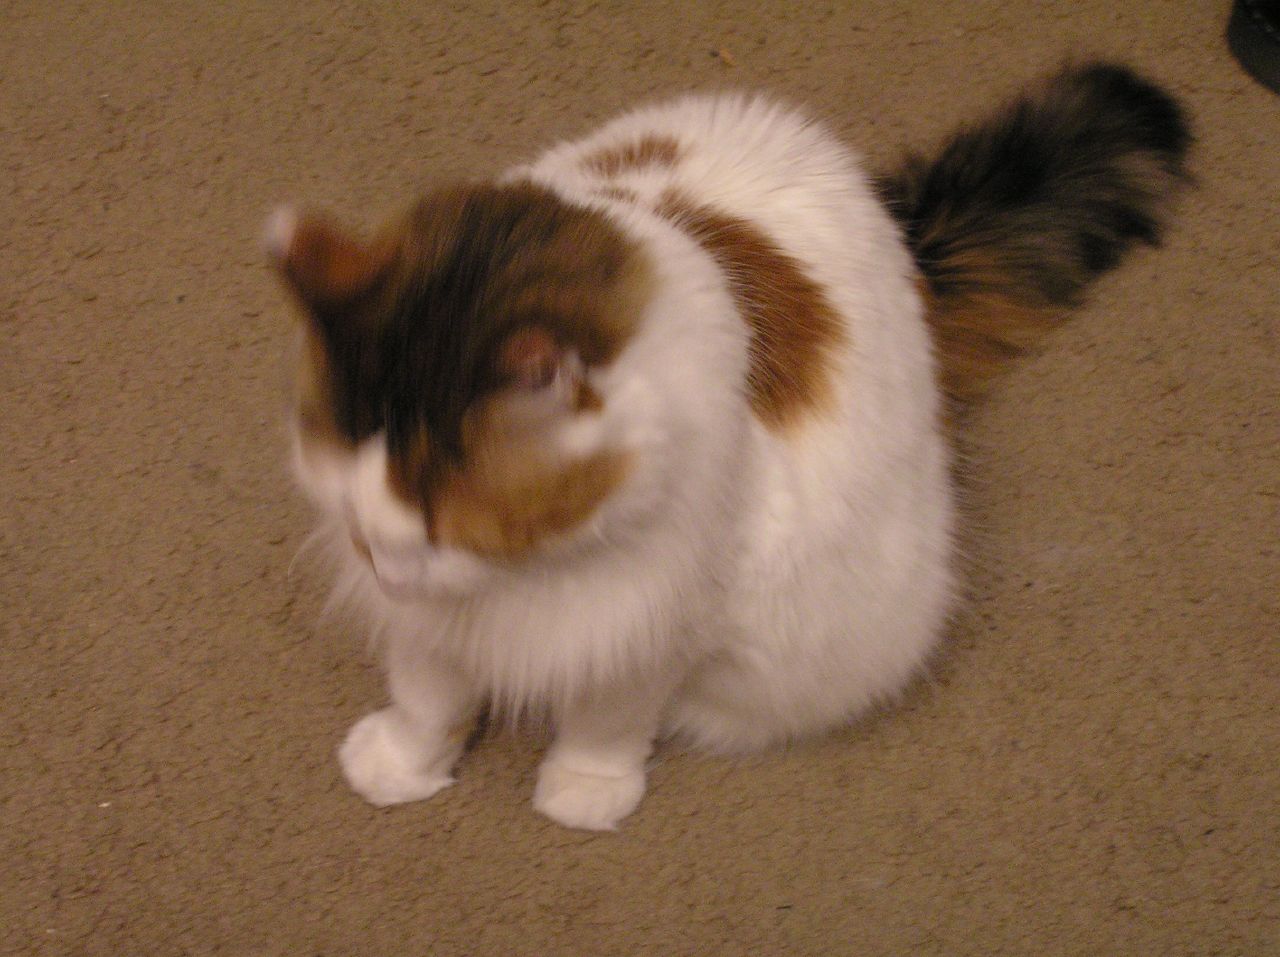 a fluffy brown and white cat sitting on the ground